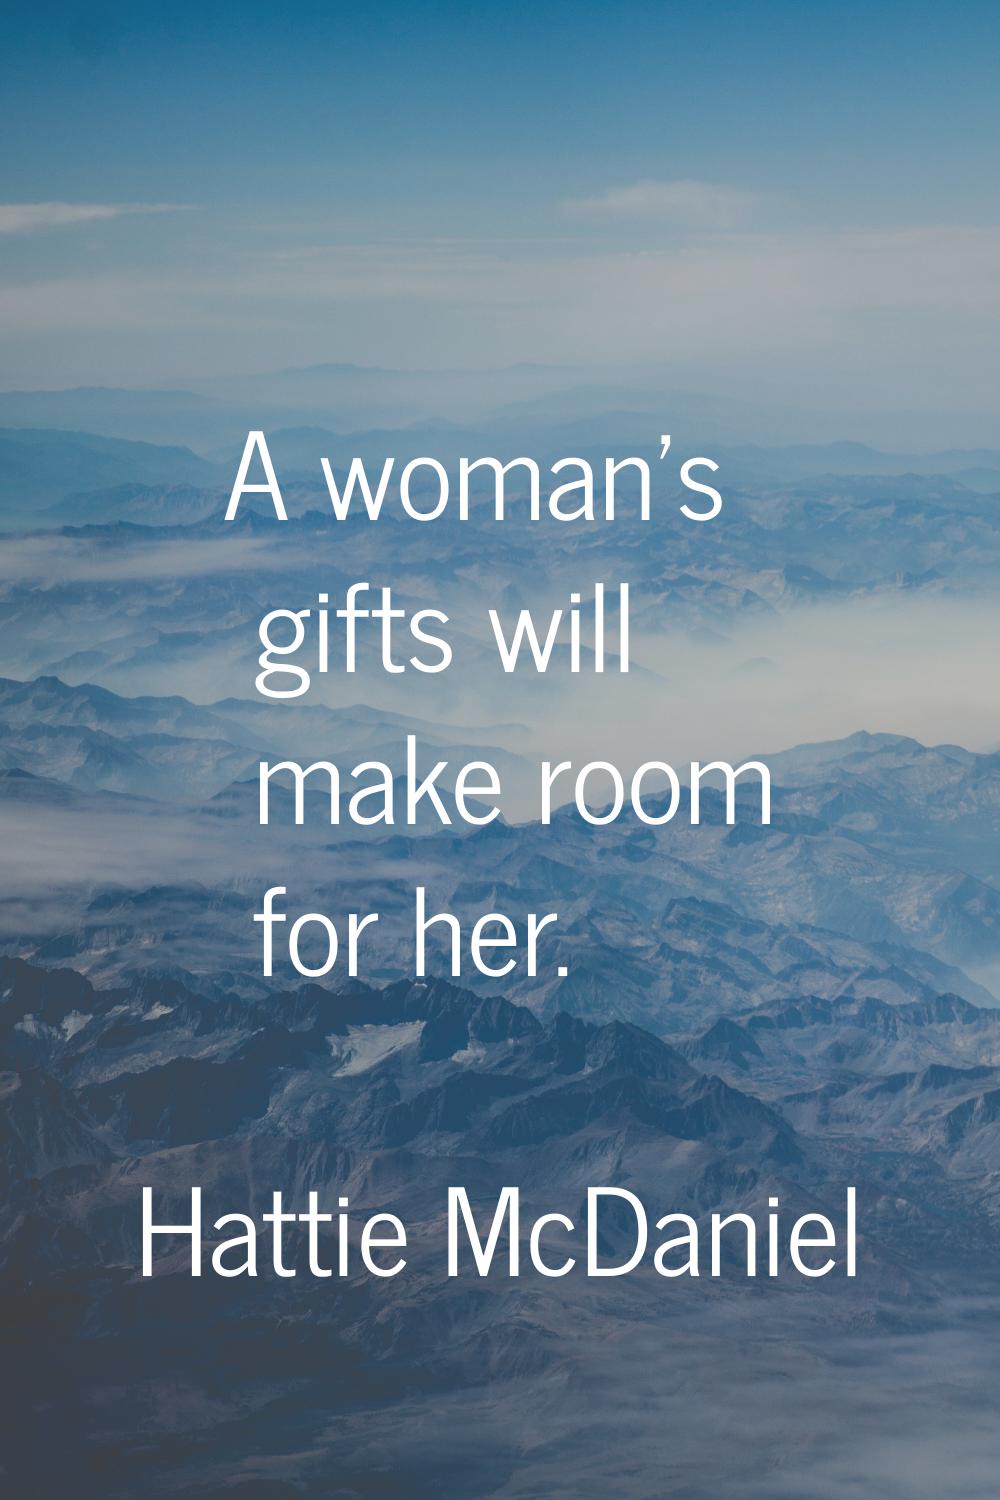 A woman's gifts will make room for her.